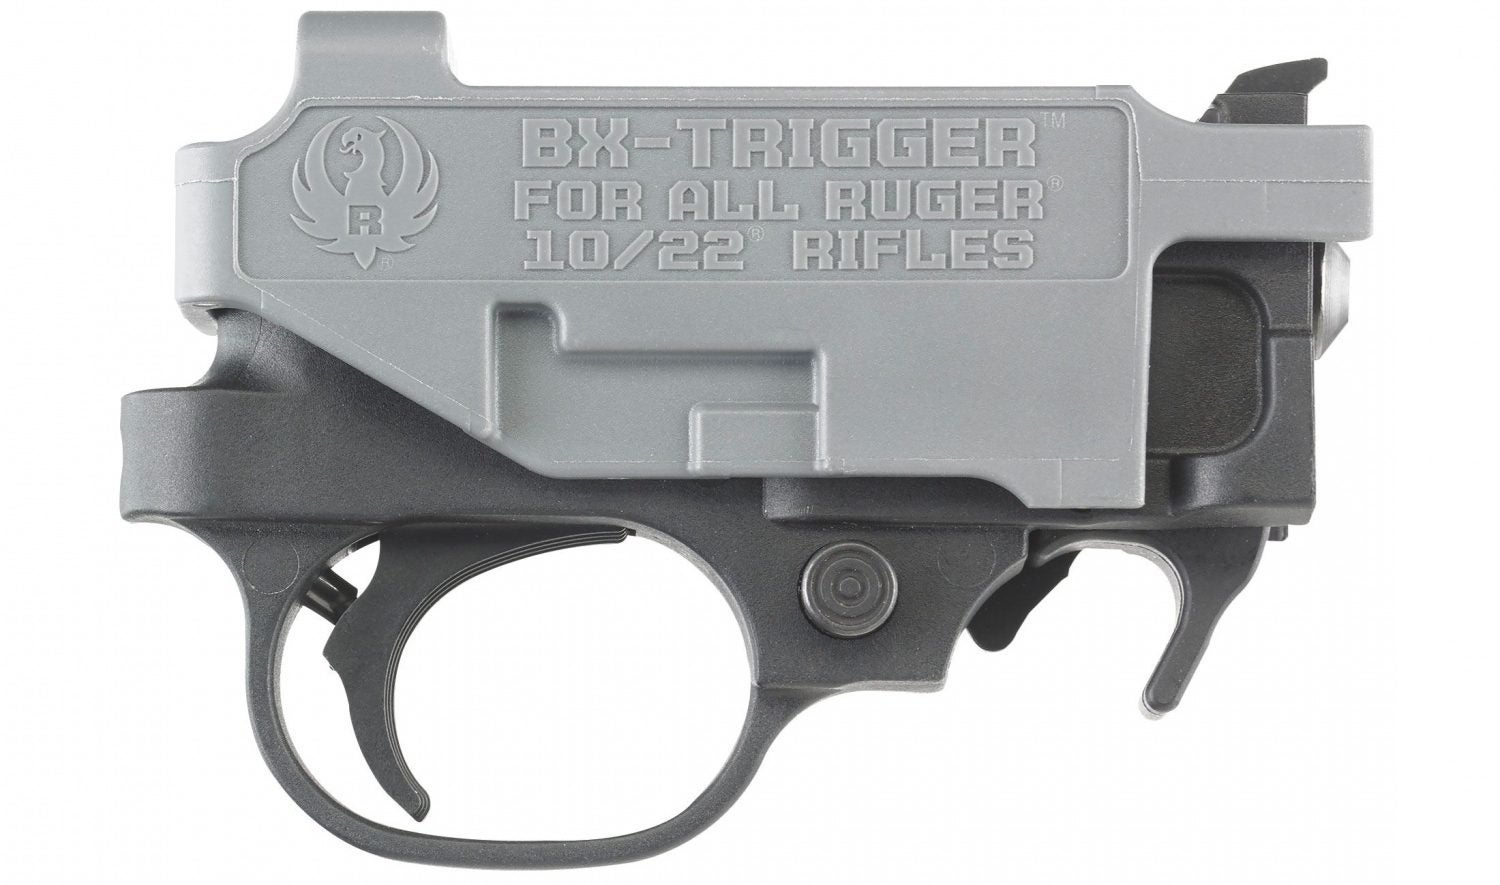 TFB Weekly Web Deals 19: The Best Ruger 10/22 Upgrades